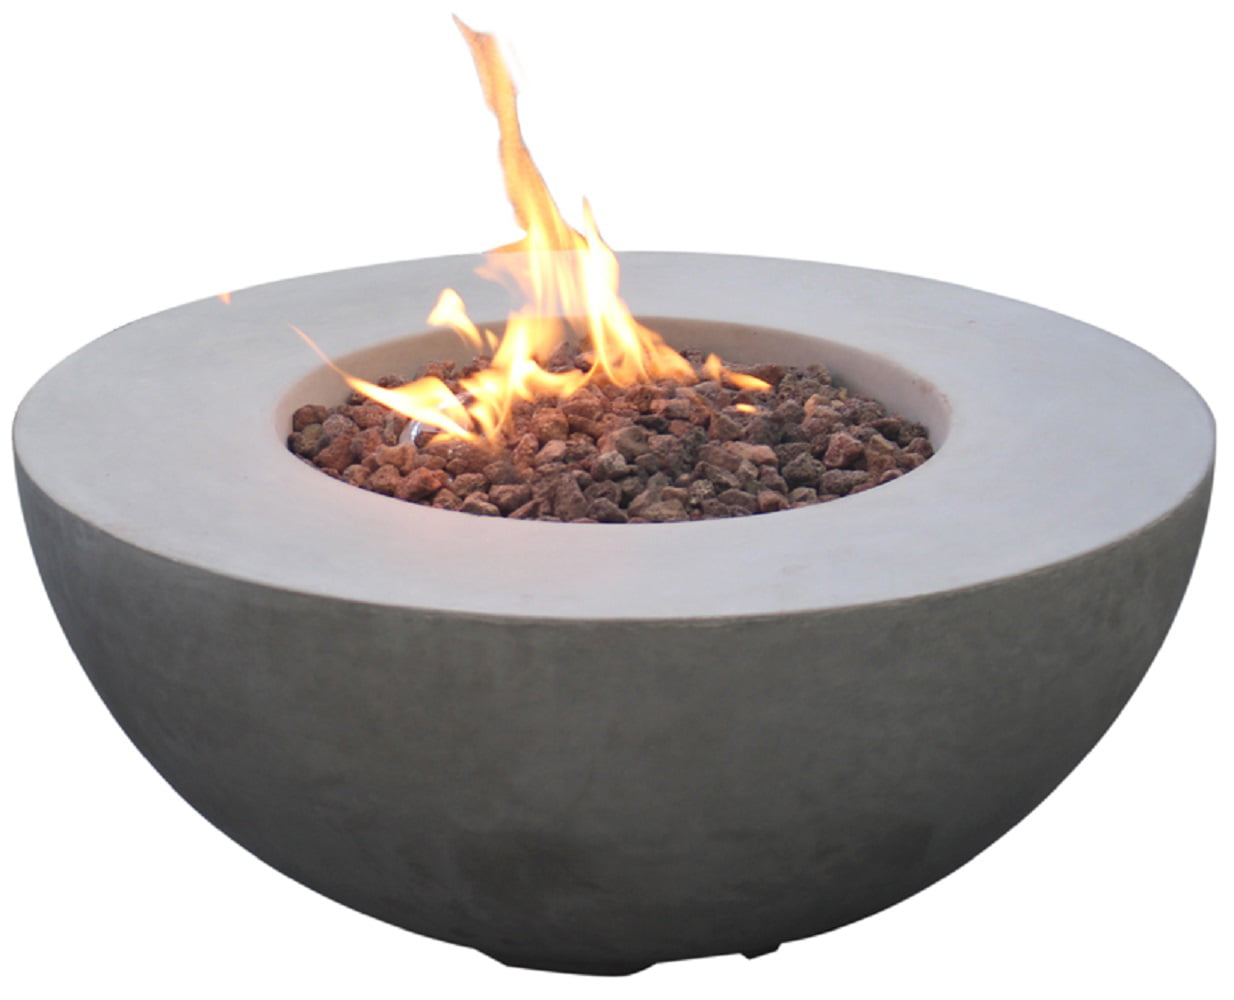 Modeno Outdoor Roca Fire Pit Table Grey, Lava Rock Fire Pit Table